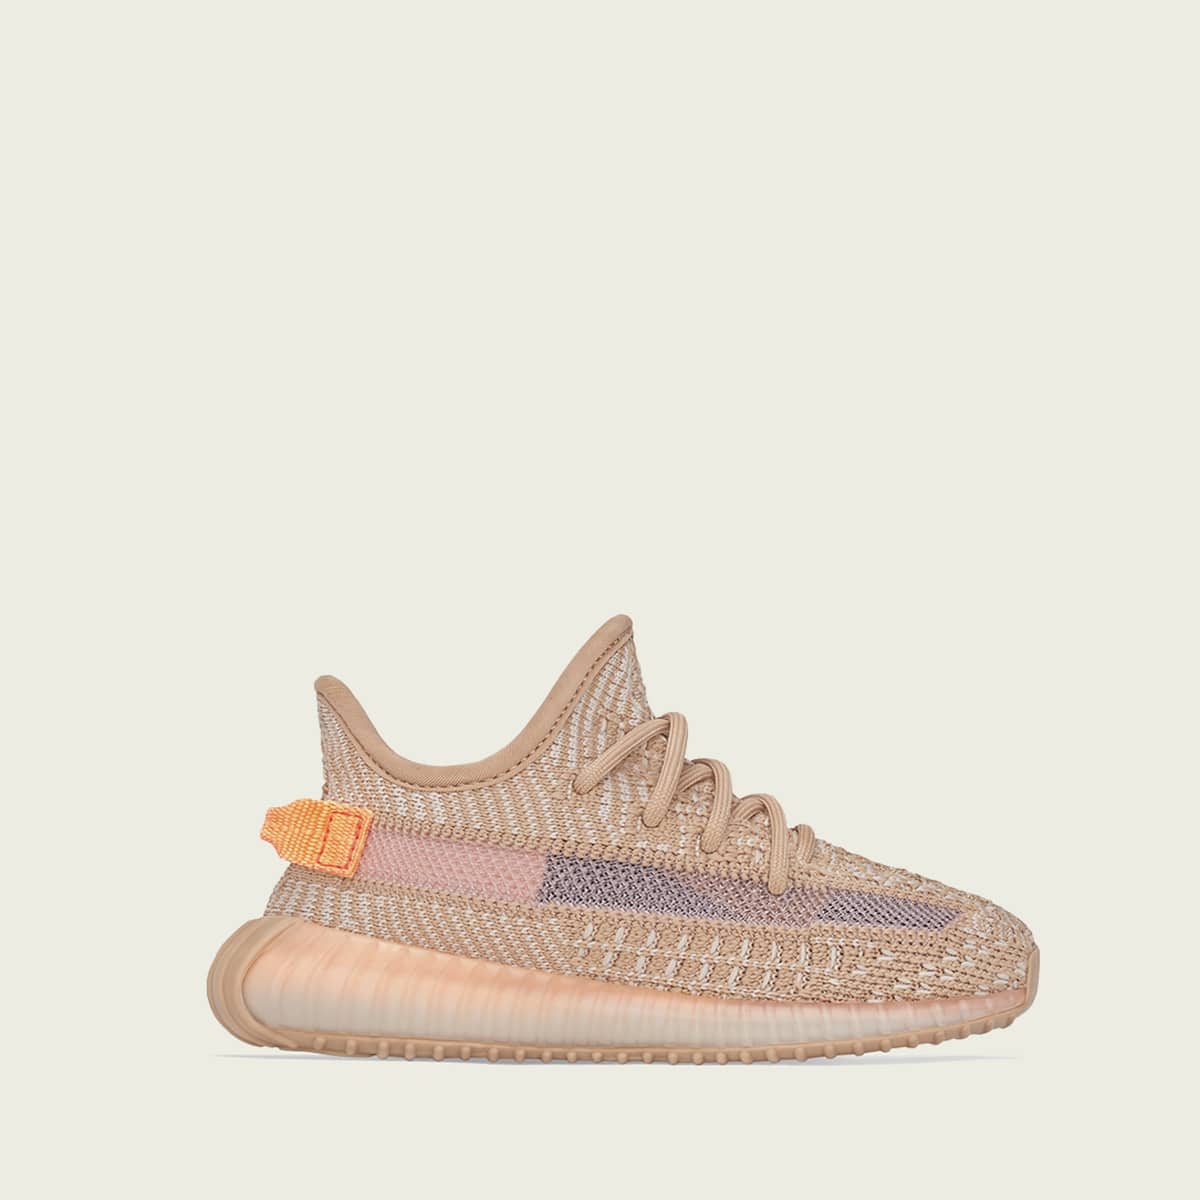 adidas YEEZY BOOST 350 V2 INFANT PINK 